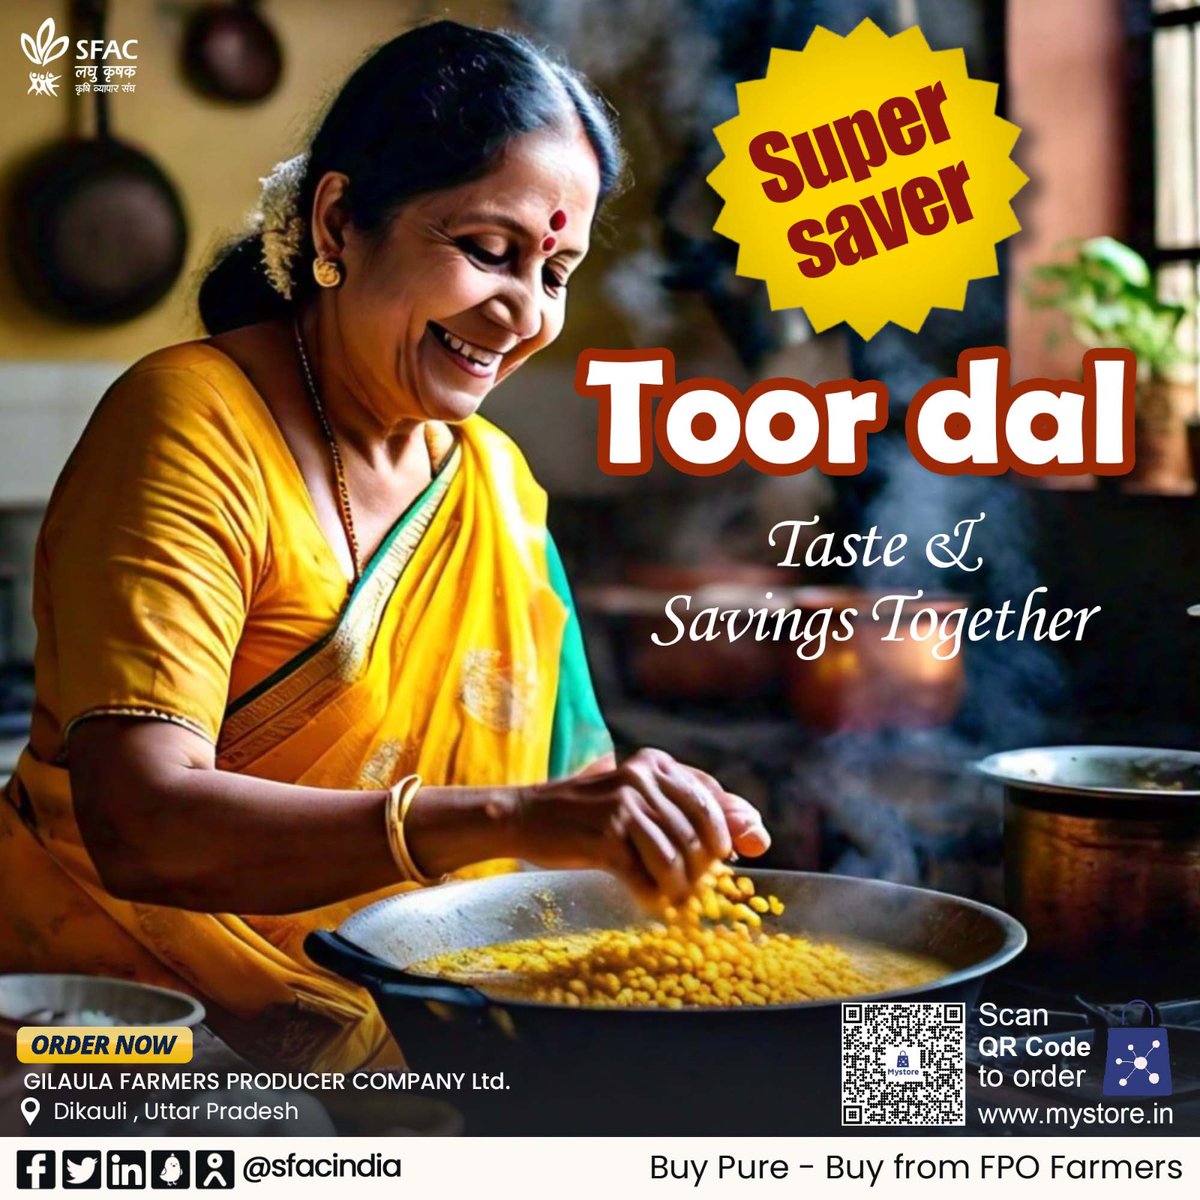 Grab super savings on organic unpolished toor dal.
Enjoy protein & fiber-rich toor dal this summer & also save your pocket.

Buy from FPO farmers at👇

mystore.in/en/product/too…

🤑

#VocalForLocal #healthyeating #healthyhabits #healthychoices #healthyfood #tastyrecipes #SFACIndia